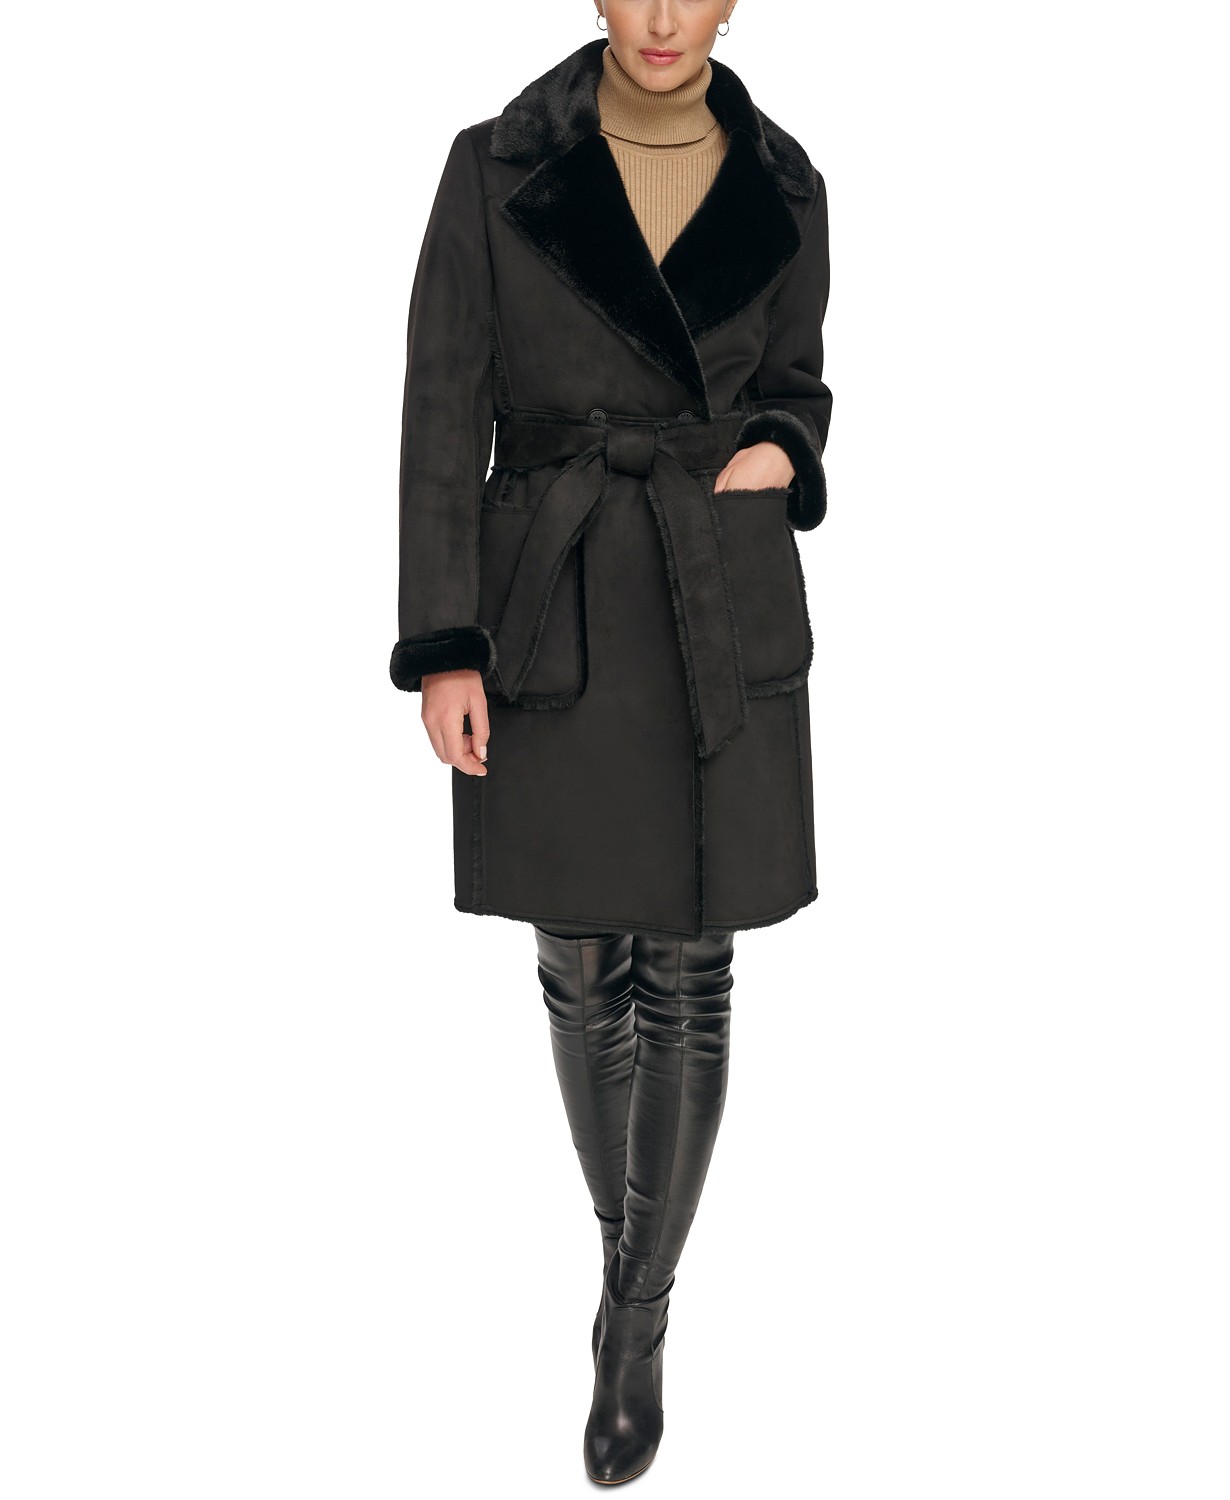 DKNY Womens Petite Belted Notched-Collar Faux-Shearling Coat